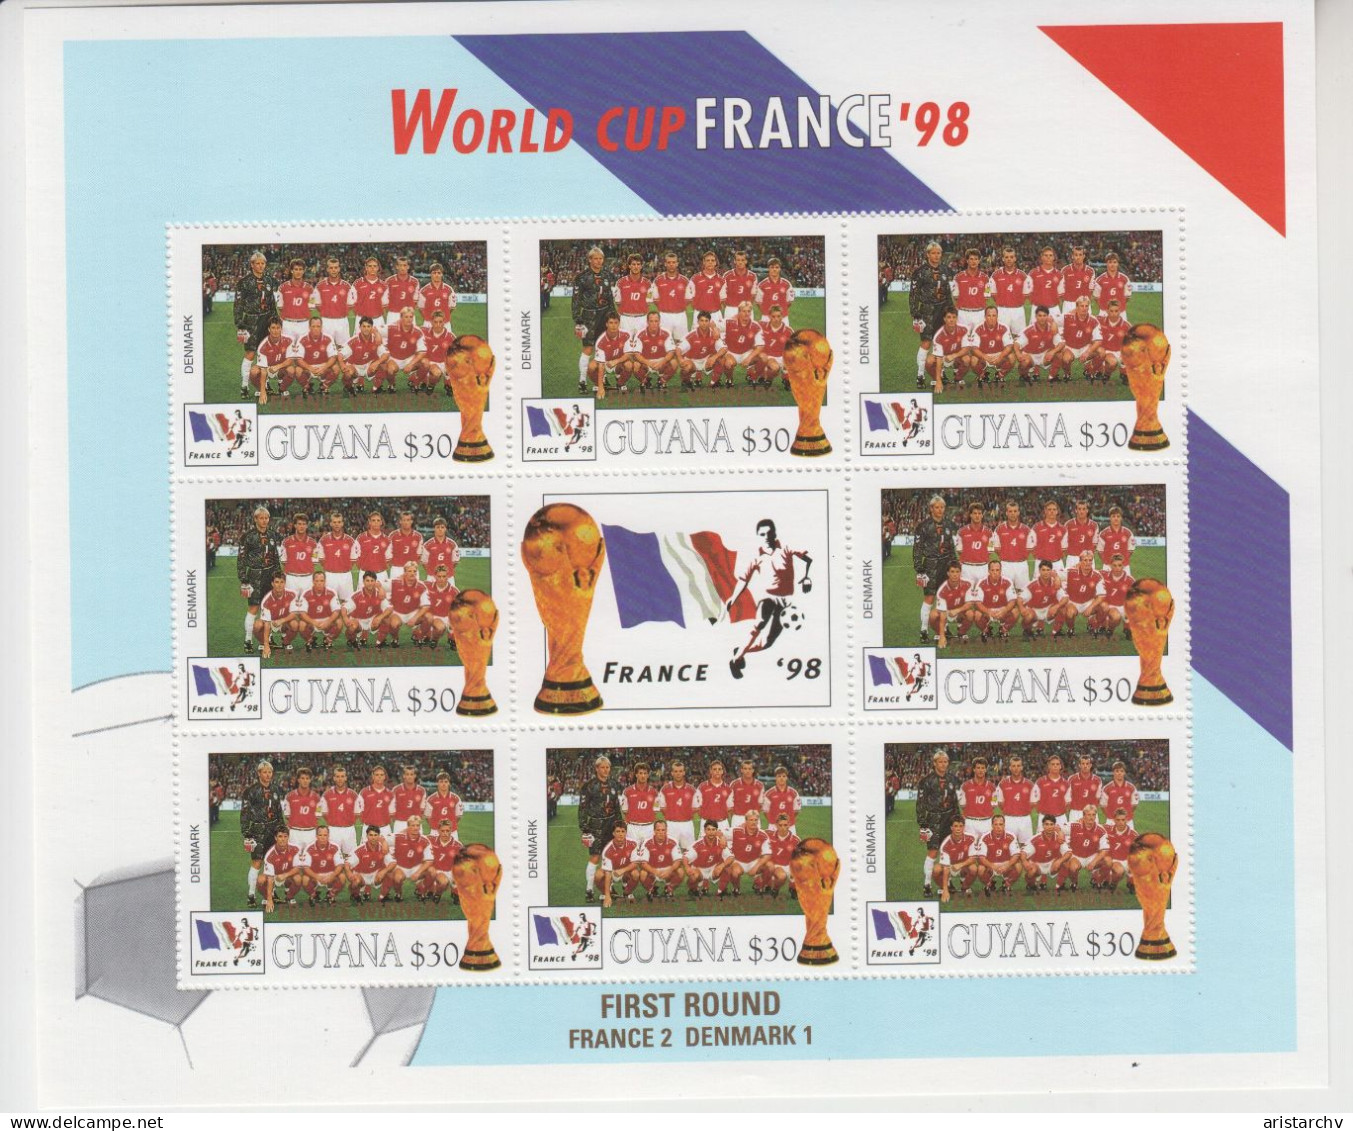 GUYANA 1998 FOOTBALL WORLD CUP 8 STAMPS AND 8 SHEETLETS OVERPRINT - 1998 – France